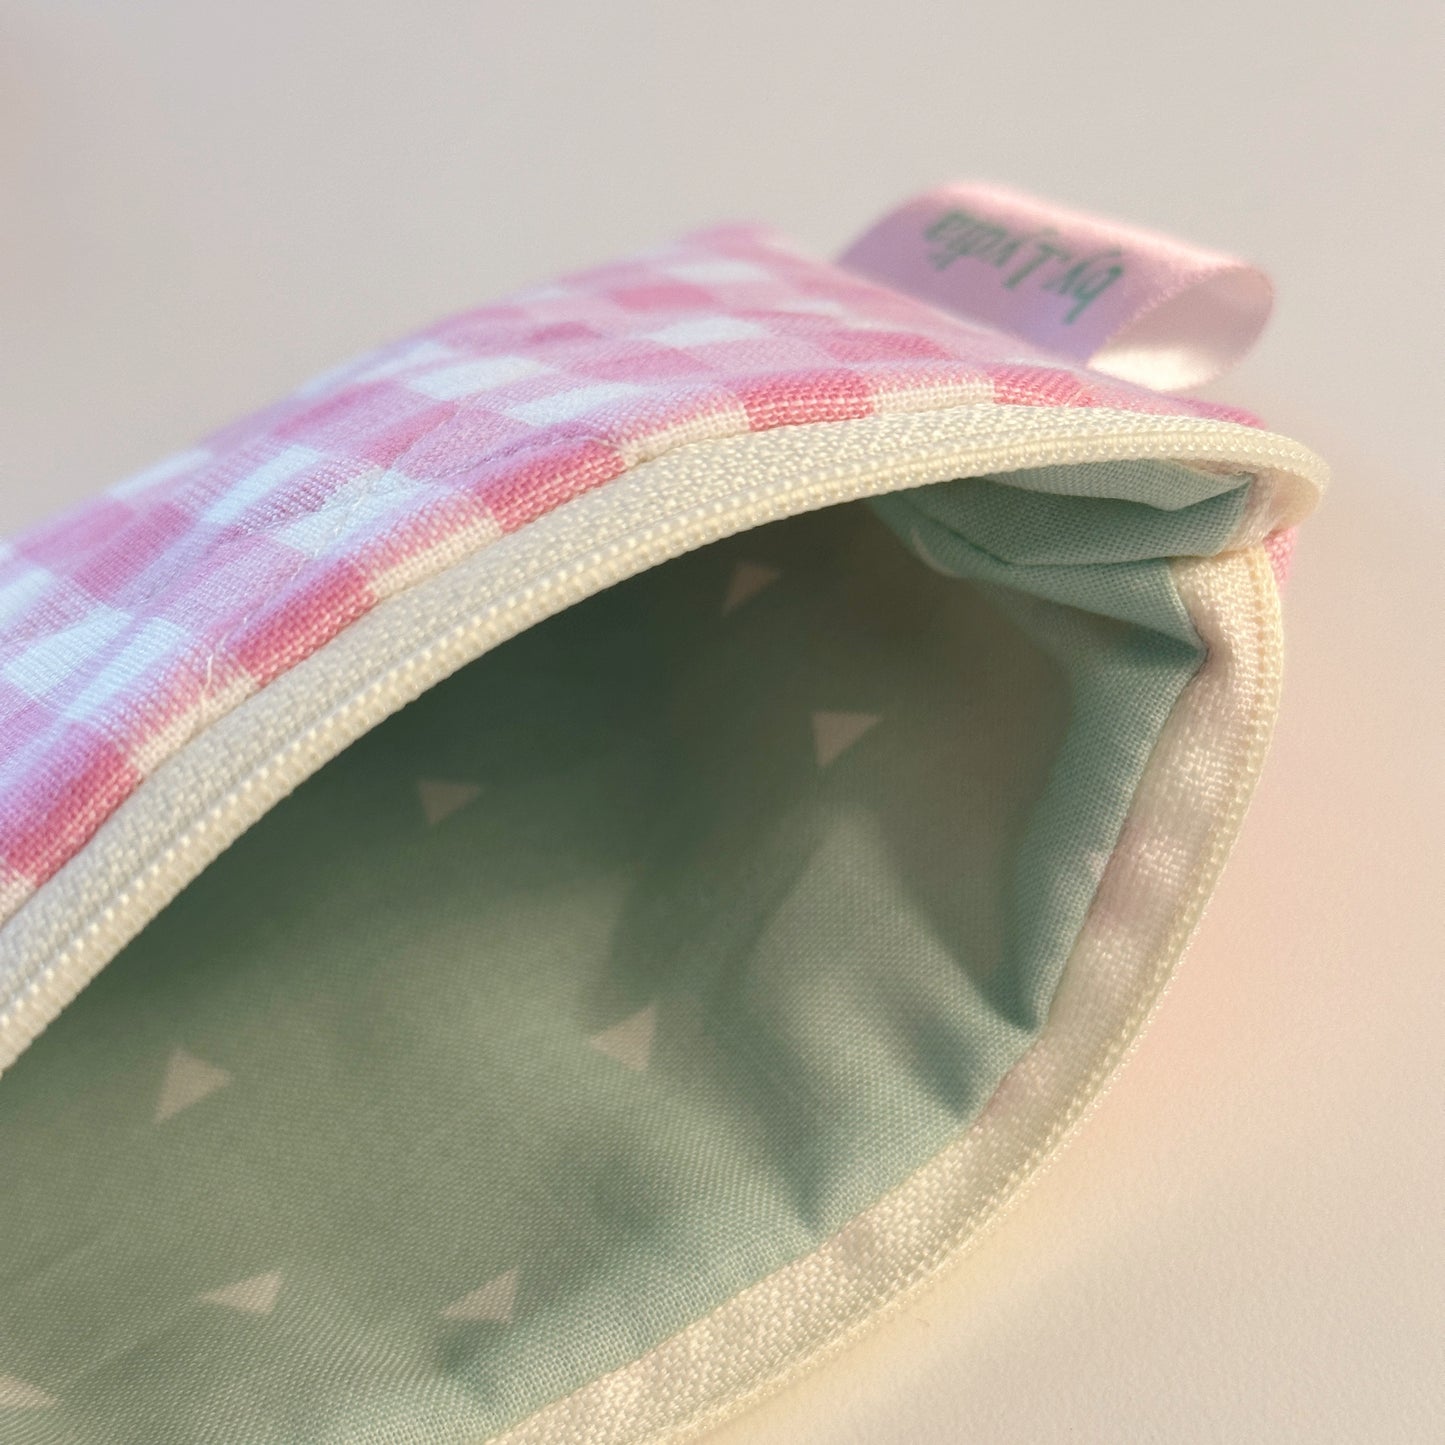 Small Flat Pouch - Pink Gingham